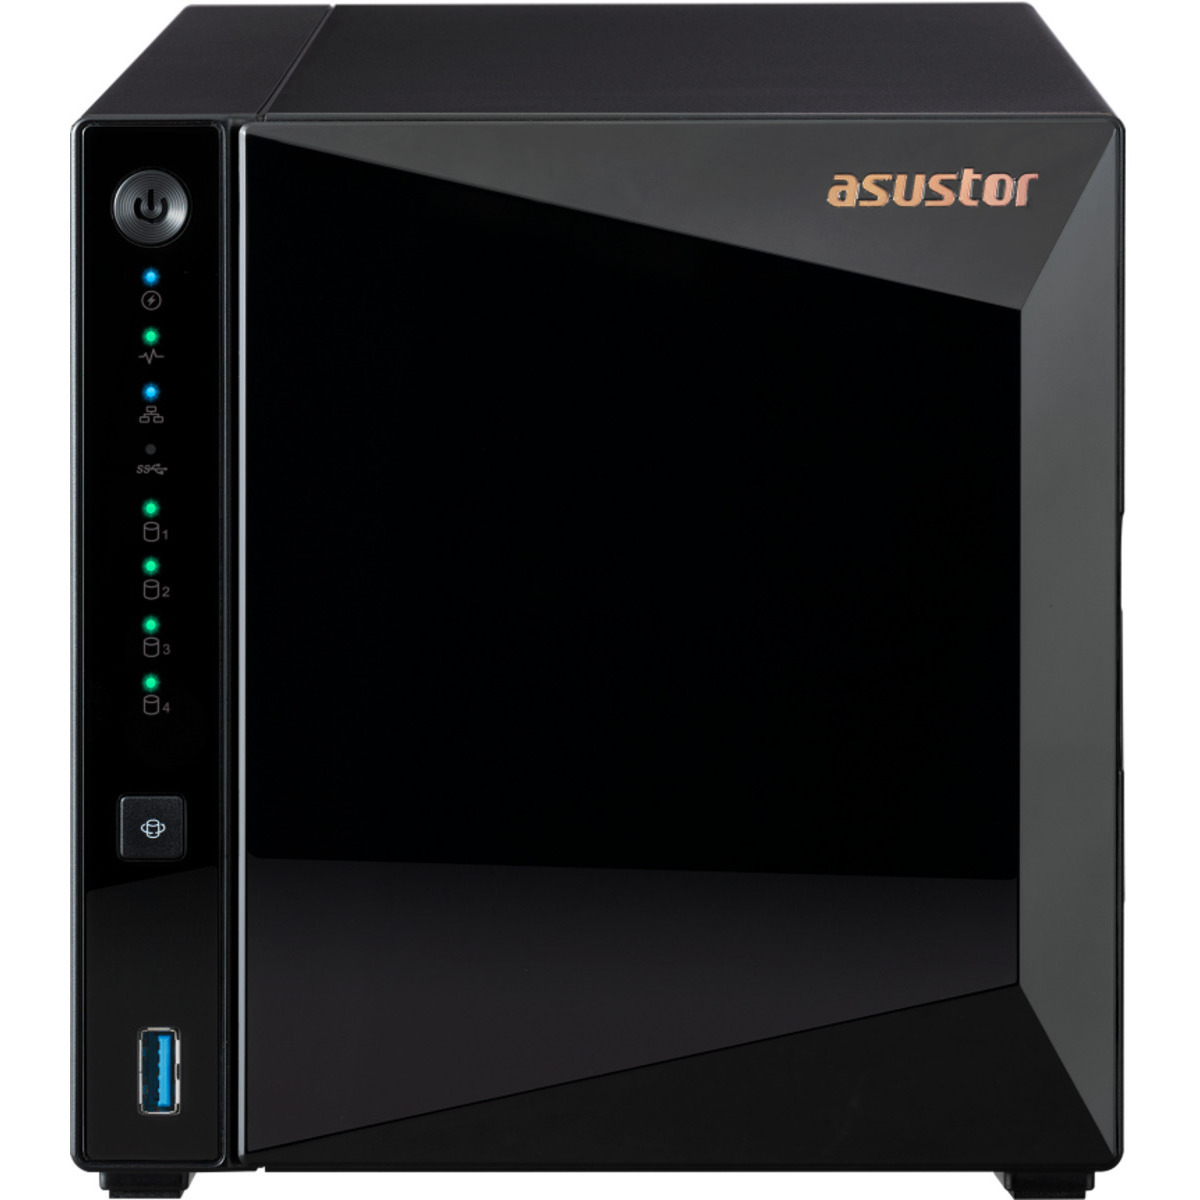 ASUSTOR DRIVESTOR 4 Pro Gen2 AS3304T v2 24tb 4-Bay Desktop Personal / Basic Home / Small Office NAS - Network Attached Storage Device 4x6tb Western Digital Red WD60EFAX 3.5 5400rpm SATA 6Gb/s HDD NAS Class Drives Installed - Burn-In Tested - ON SALE DRIVESTOR 4 Pro Gen2 AS3304T v2